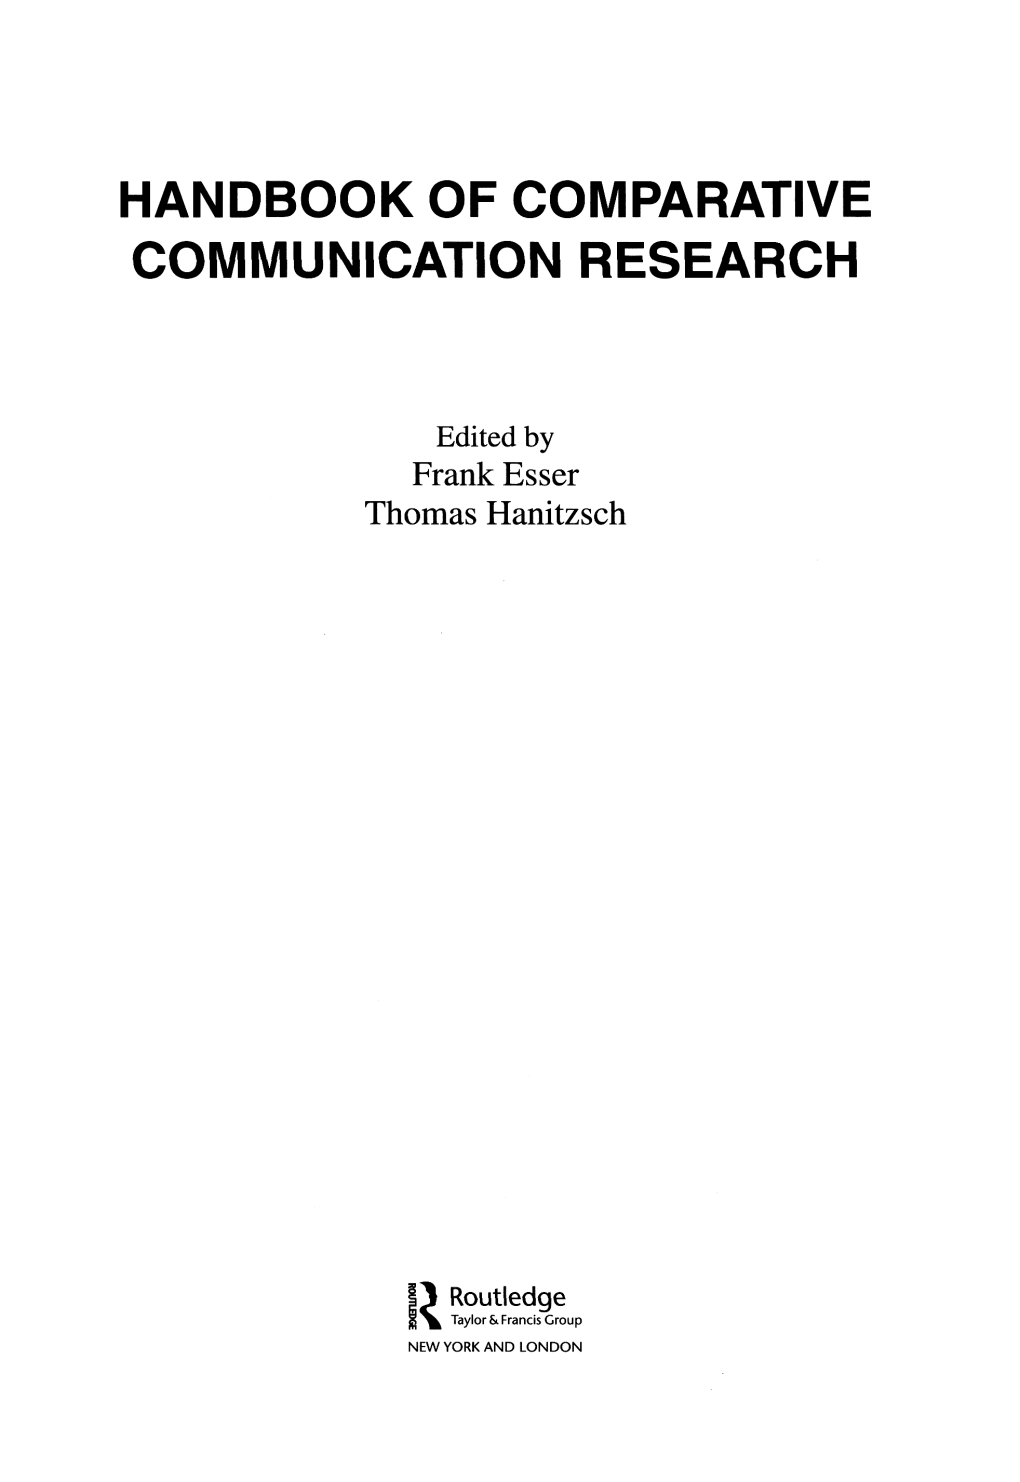 Handbook of Comparative Communication Research